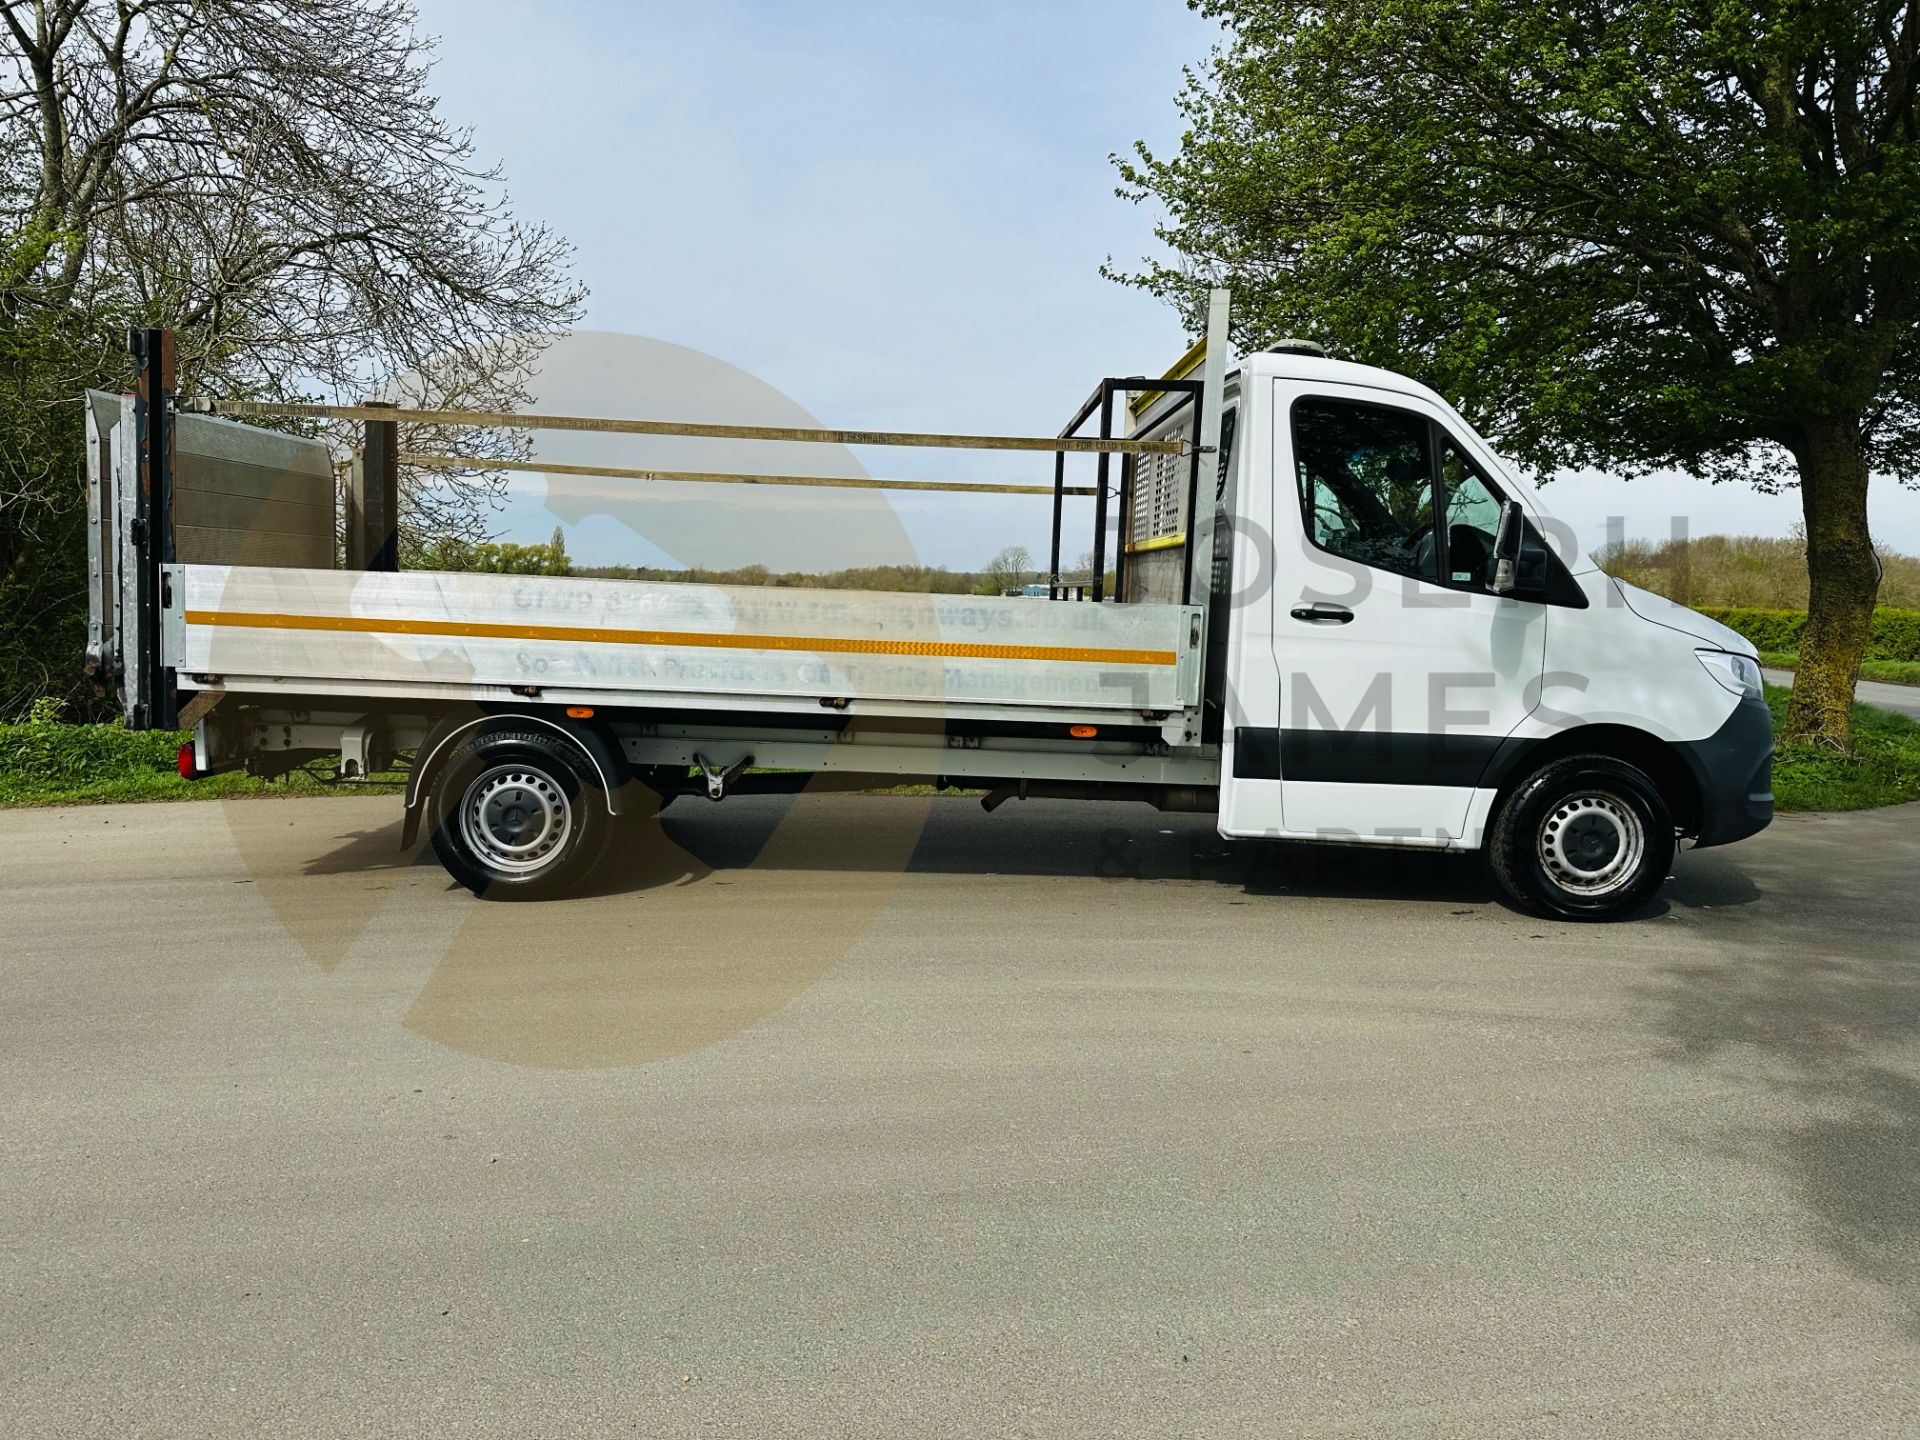 MERCEDES SPRINTER 316CDI LONG WHEEL BASE DROPSIDE WITH ELECTRIC TAIL LIFT -2020 MODEL- 1 OWNER - FSH - Image 10 of 30